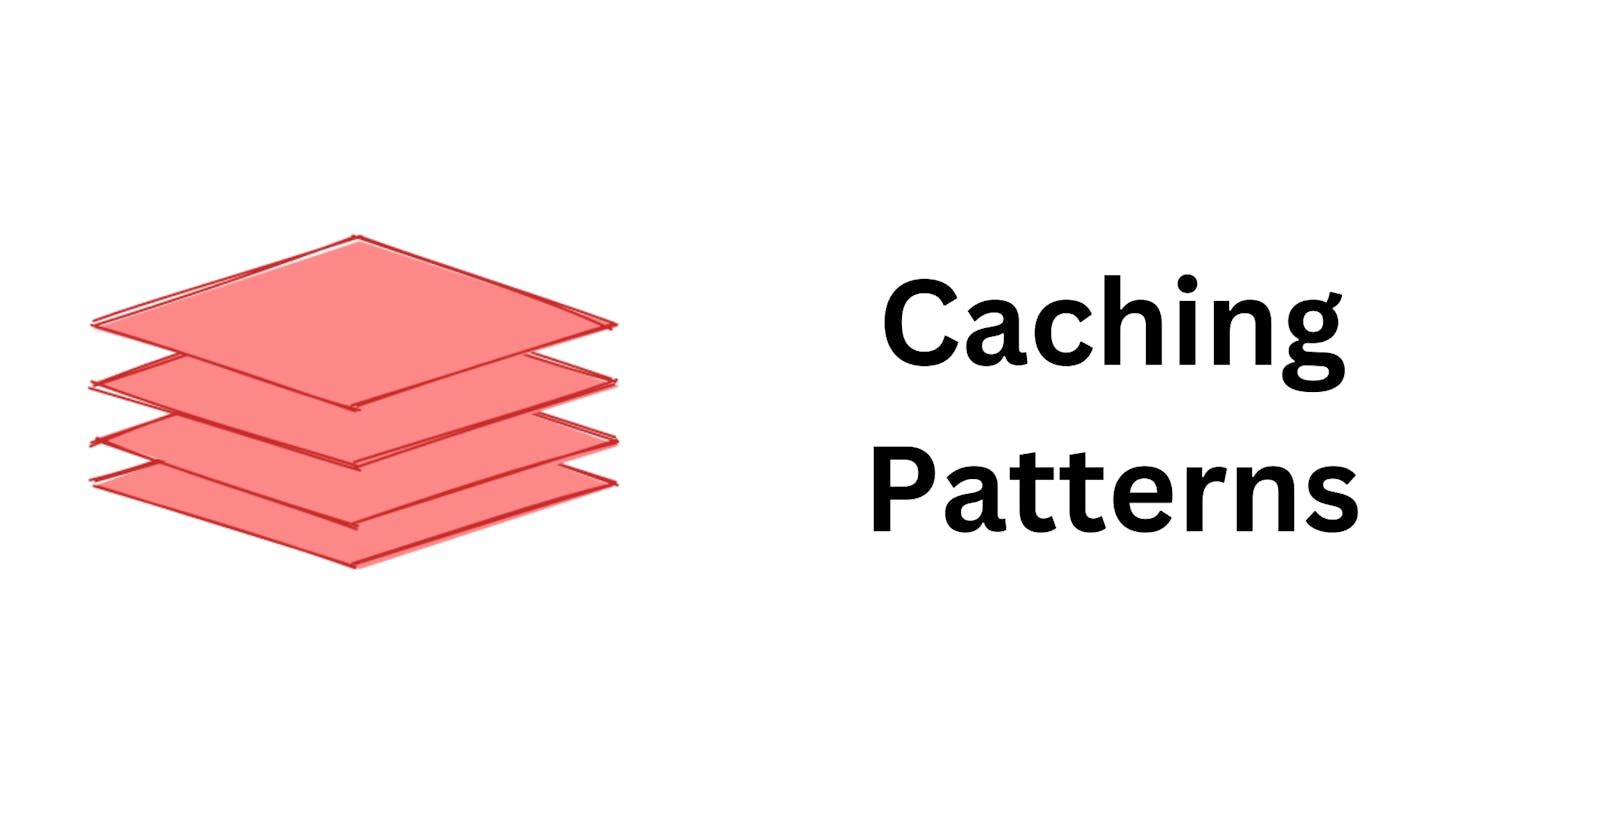 Caching and Different Patterns